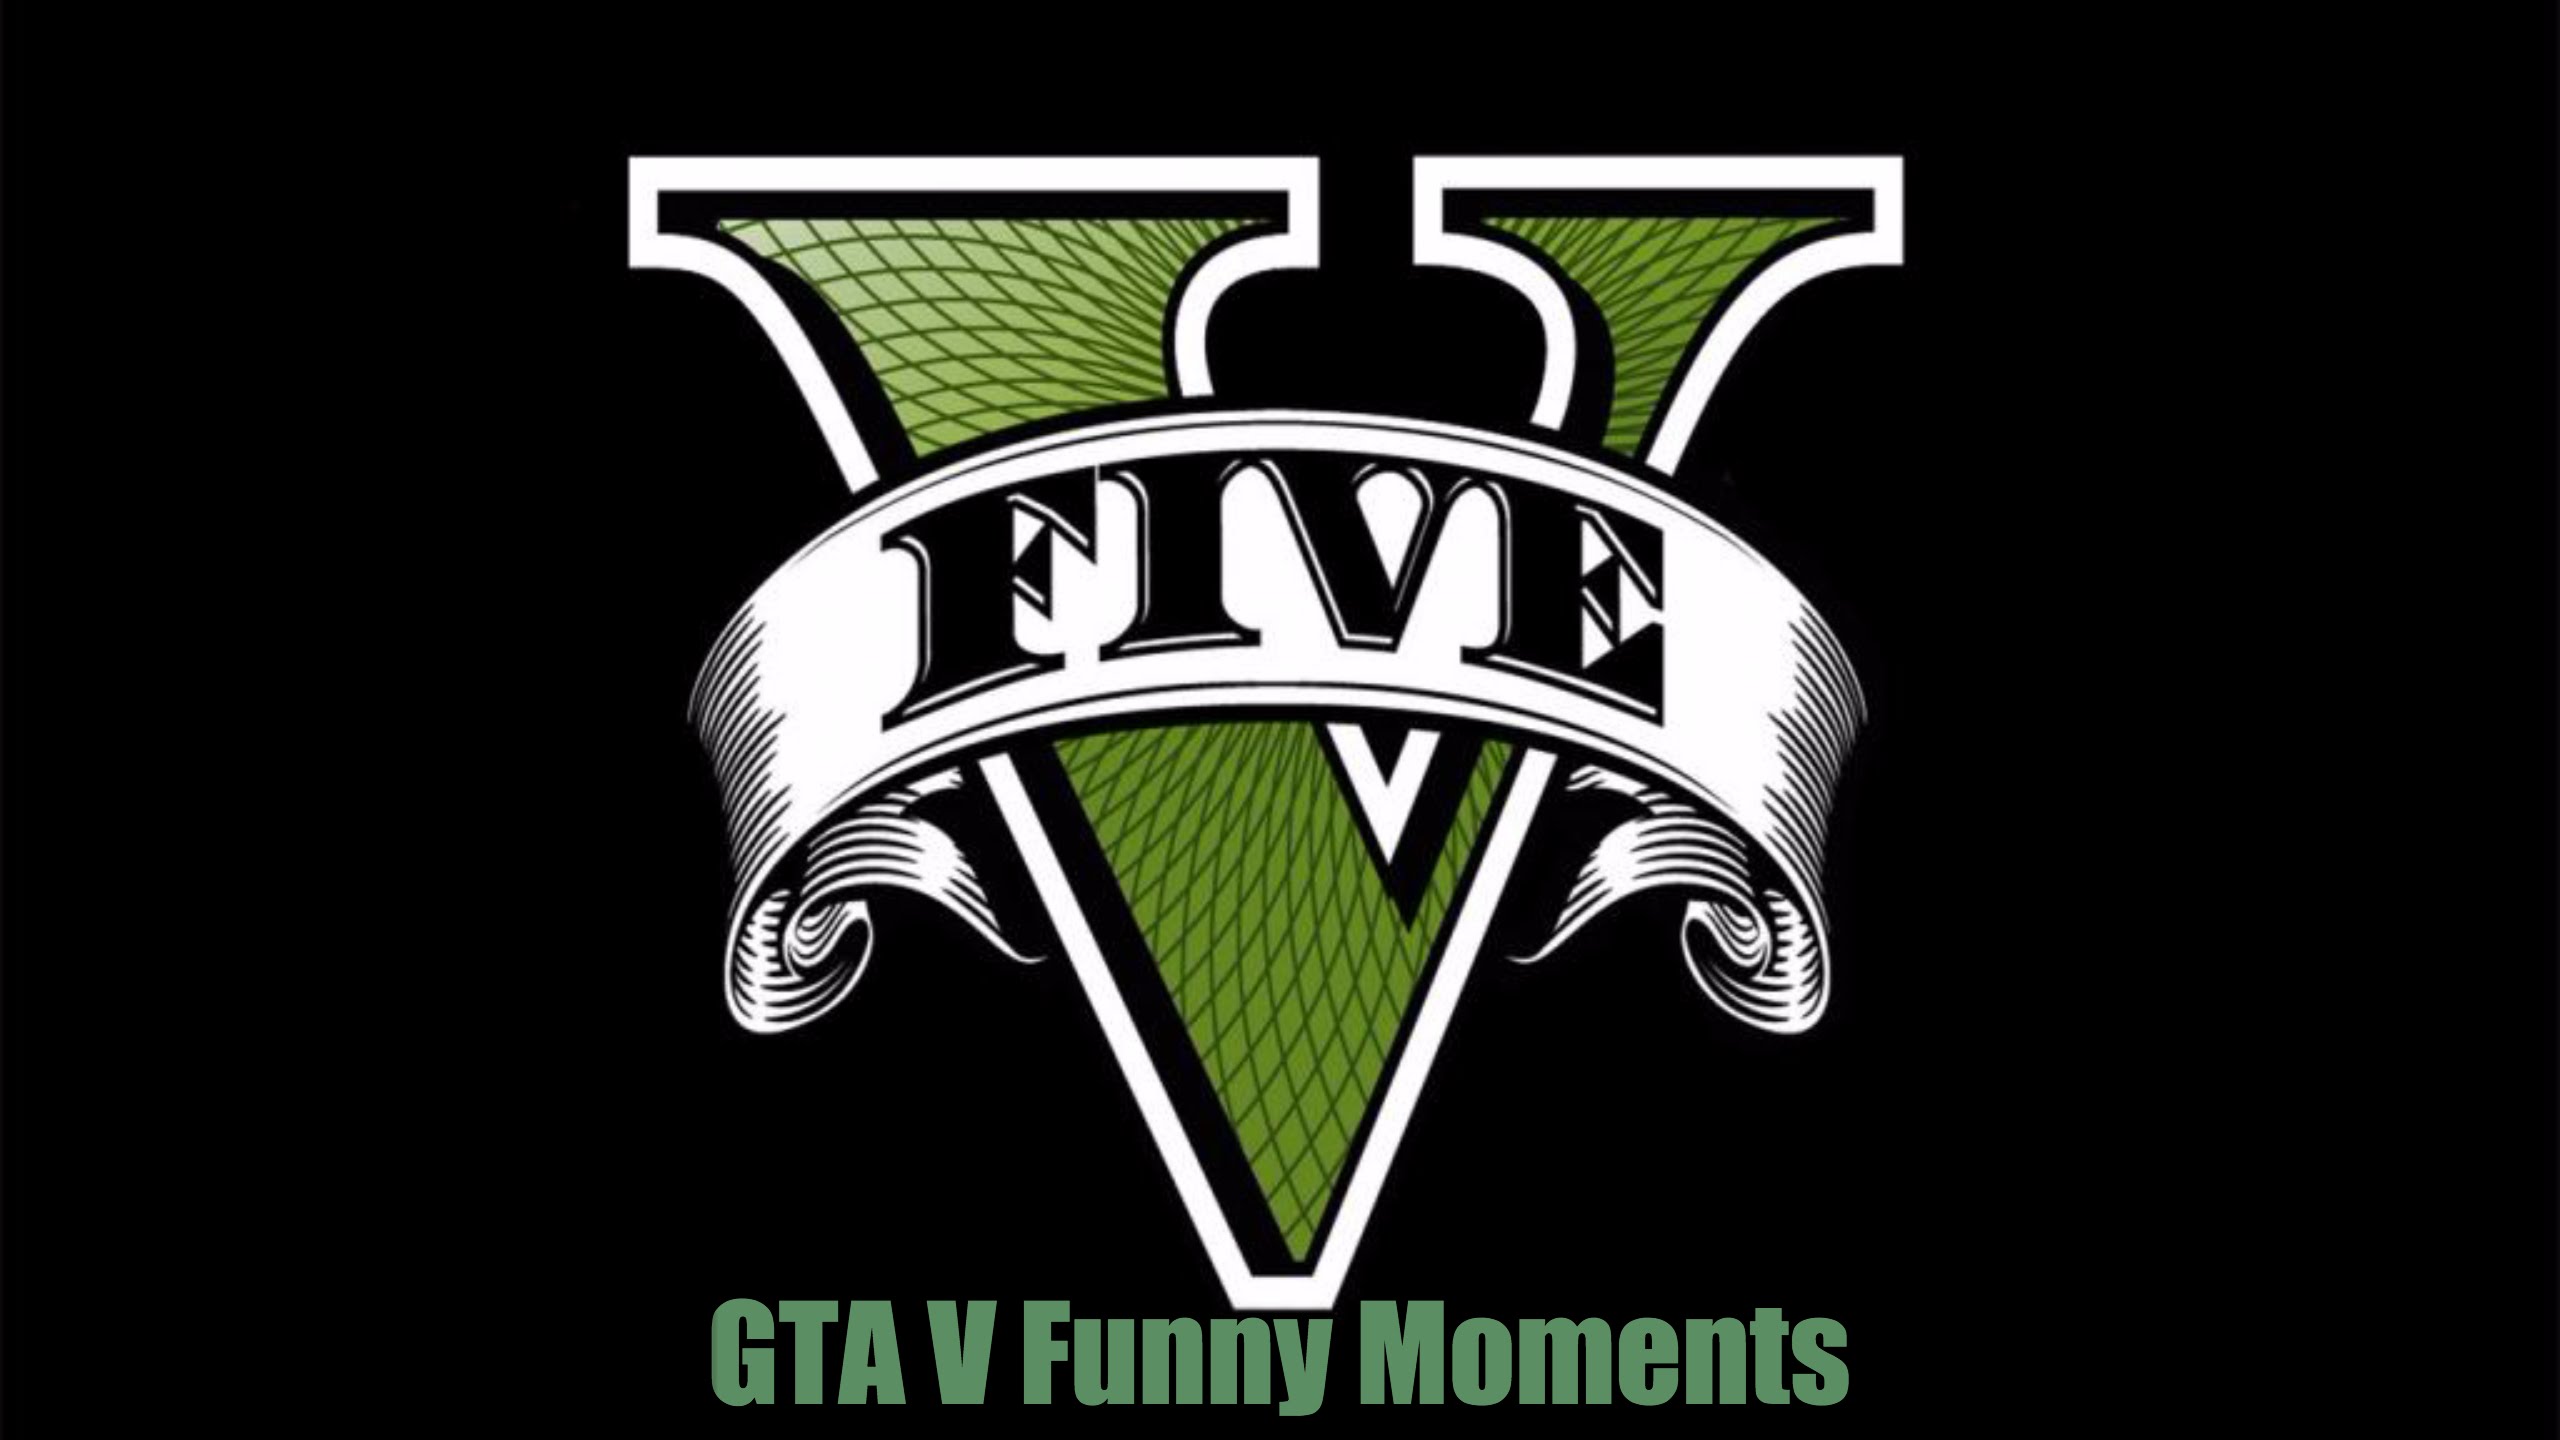 GTA V Online Funny Moments (Illuminati Confirmed, Launching Flares, and Lag???)